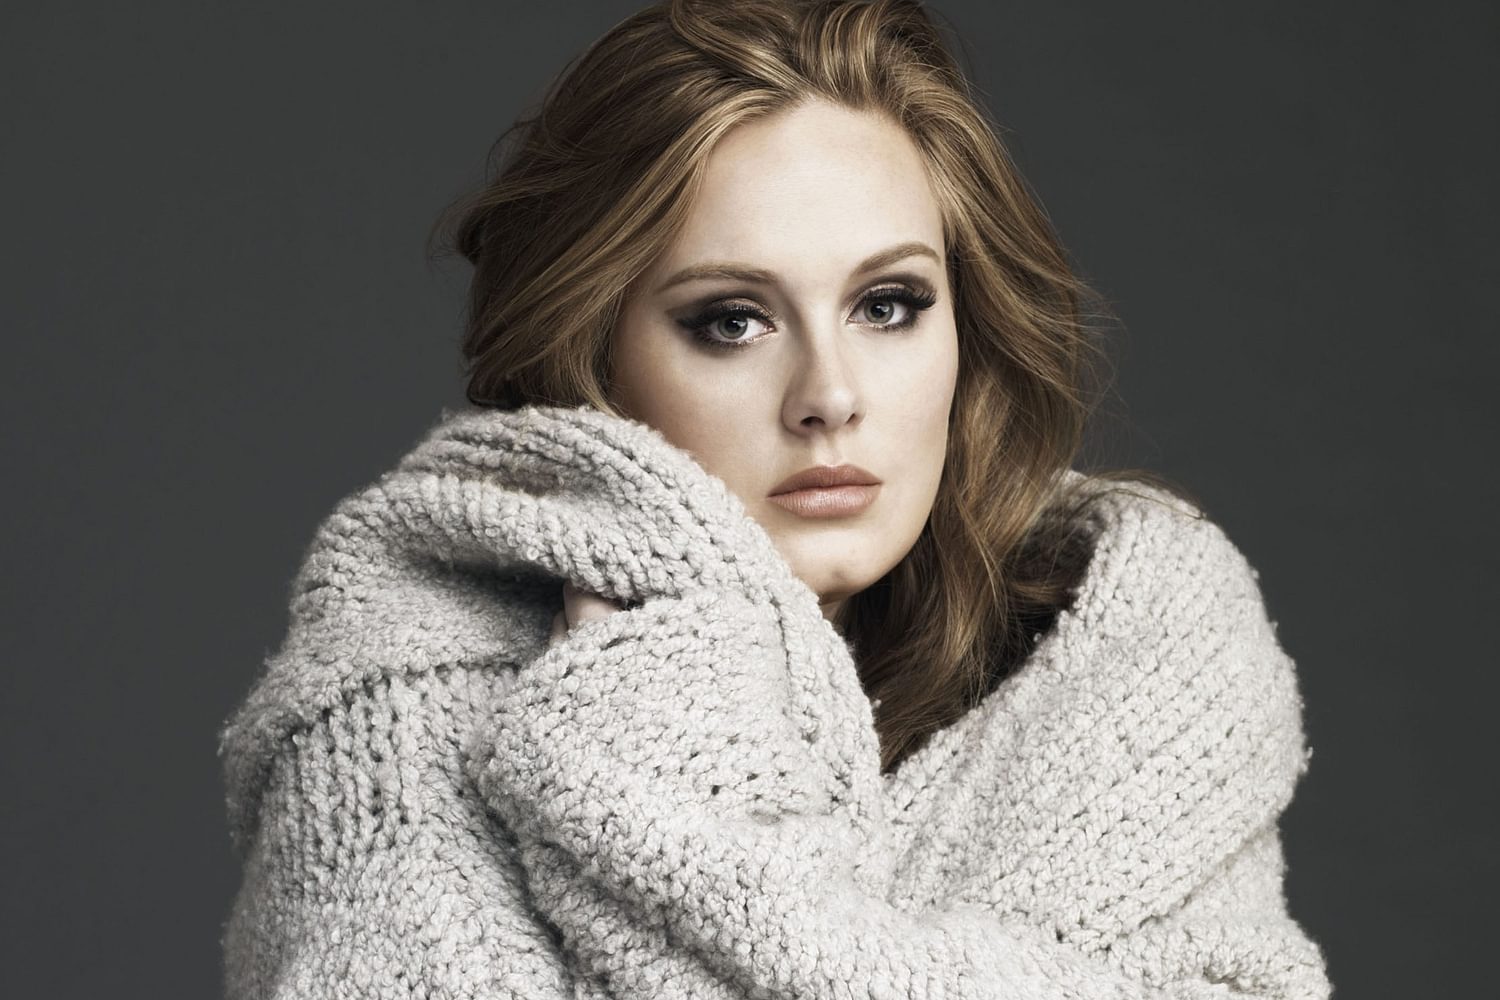 Crikey, Adele's announced two shows at Wembley Stadium